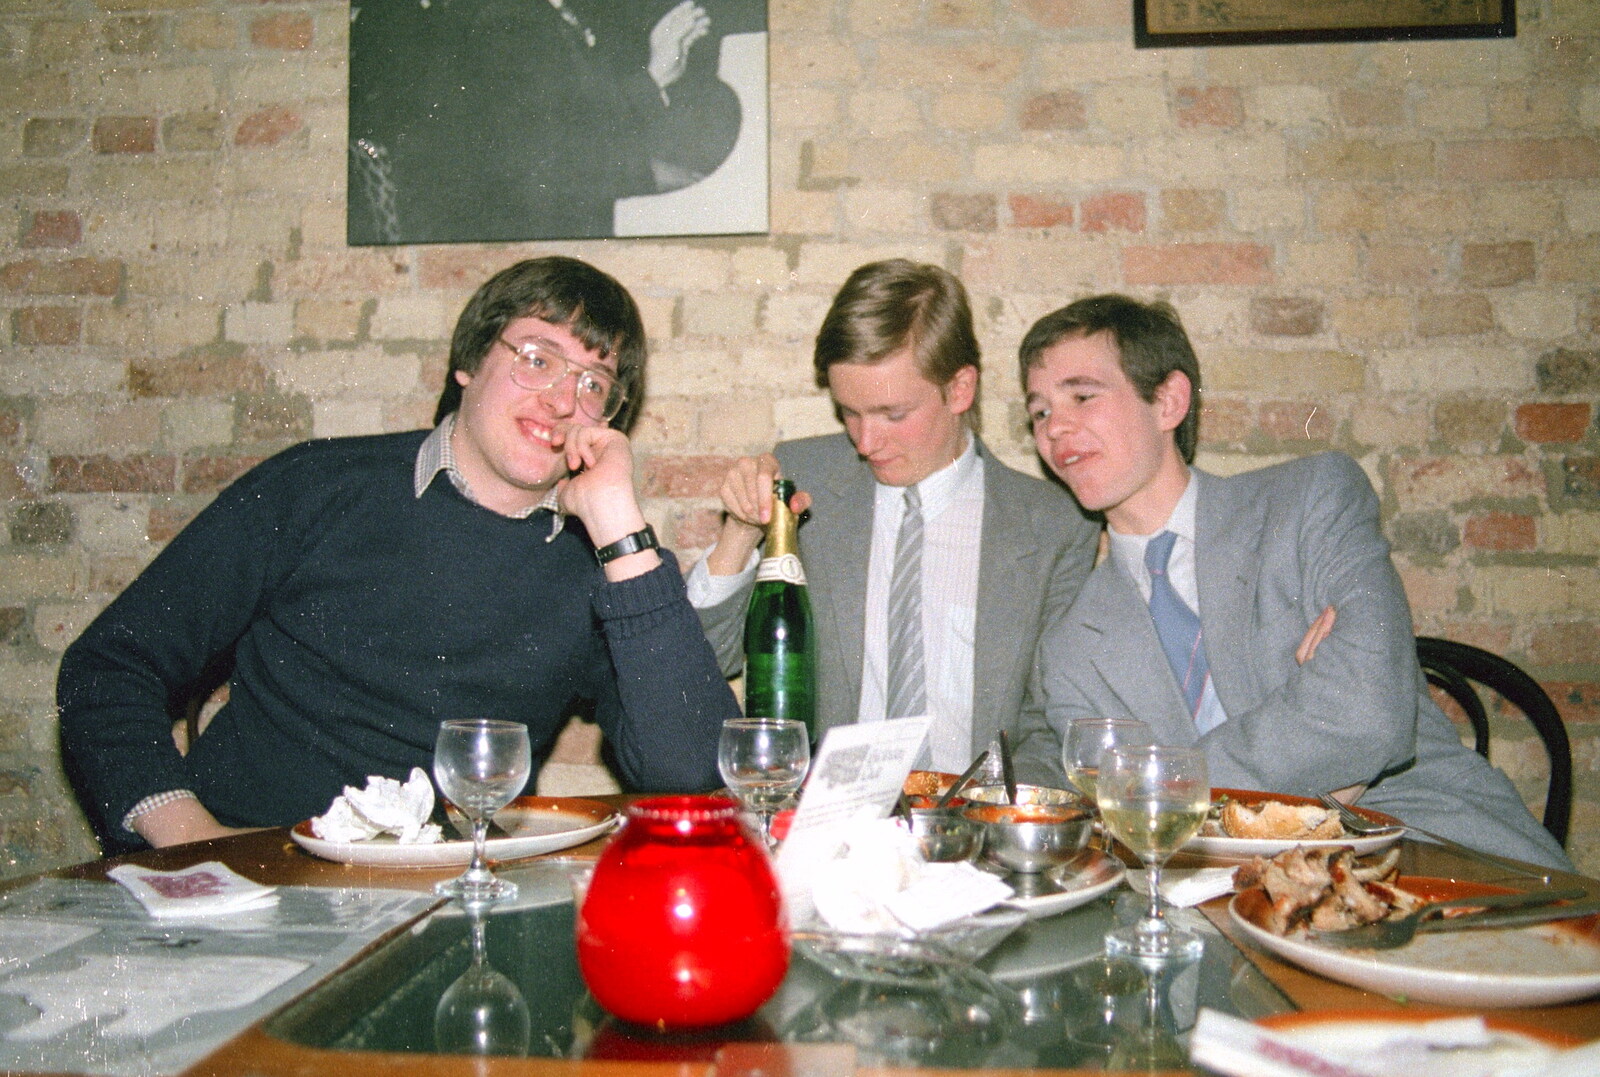 Duncan, Nosher, Phil and a bottle of fizz from A Trip to Trinity College, Cambridge - 23rd March 1986